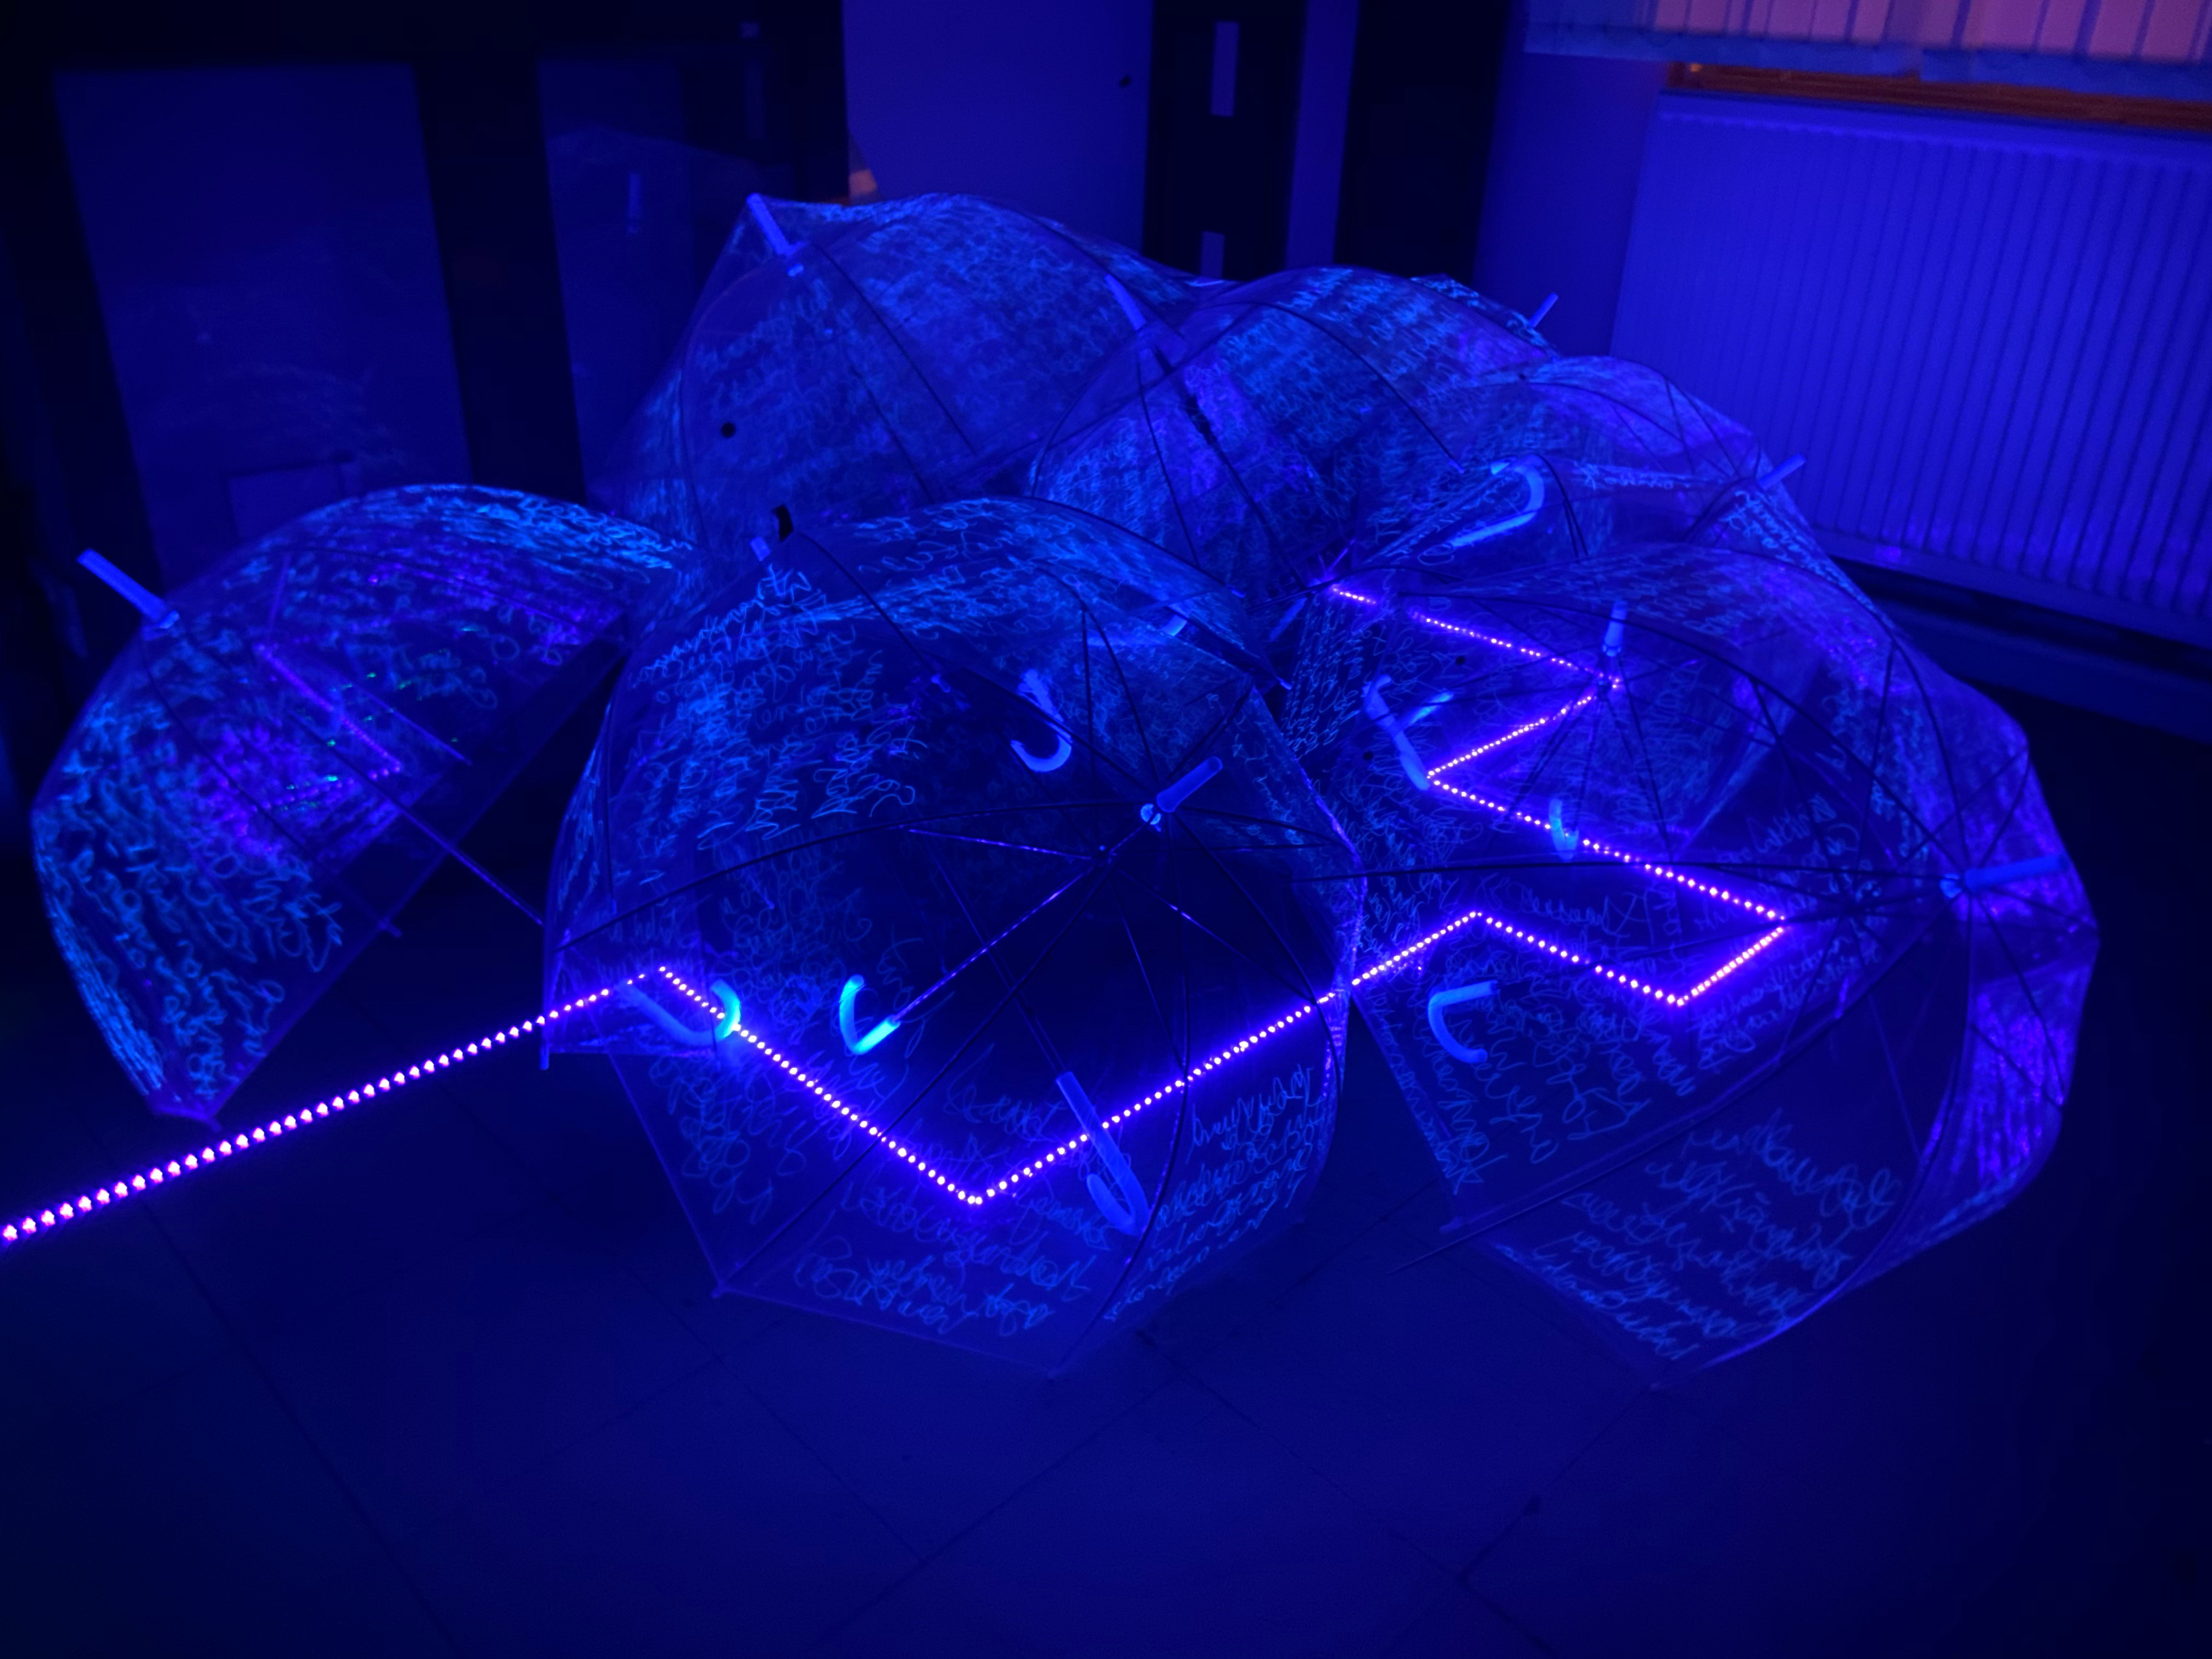 A strip of neon blue lights runs along the floor, covered by transparent plastic umbrellas with neon scrawls on them